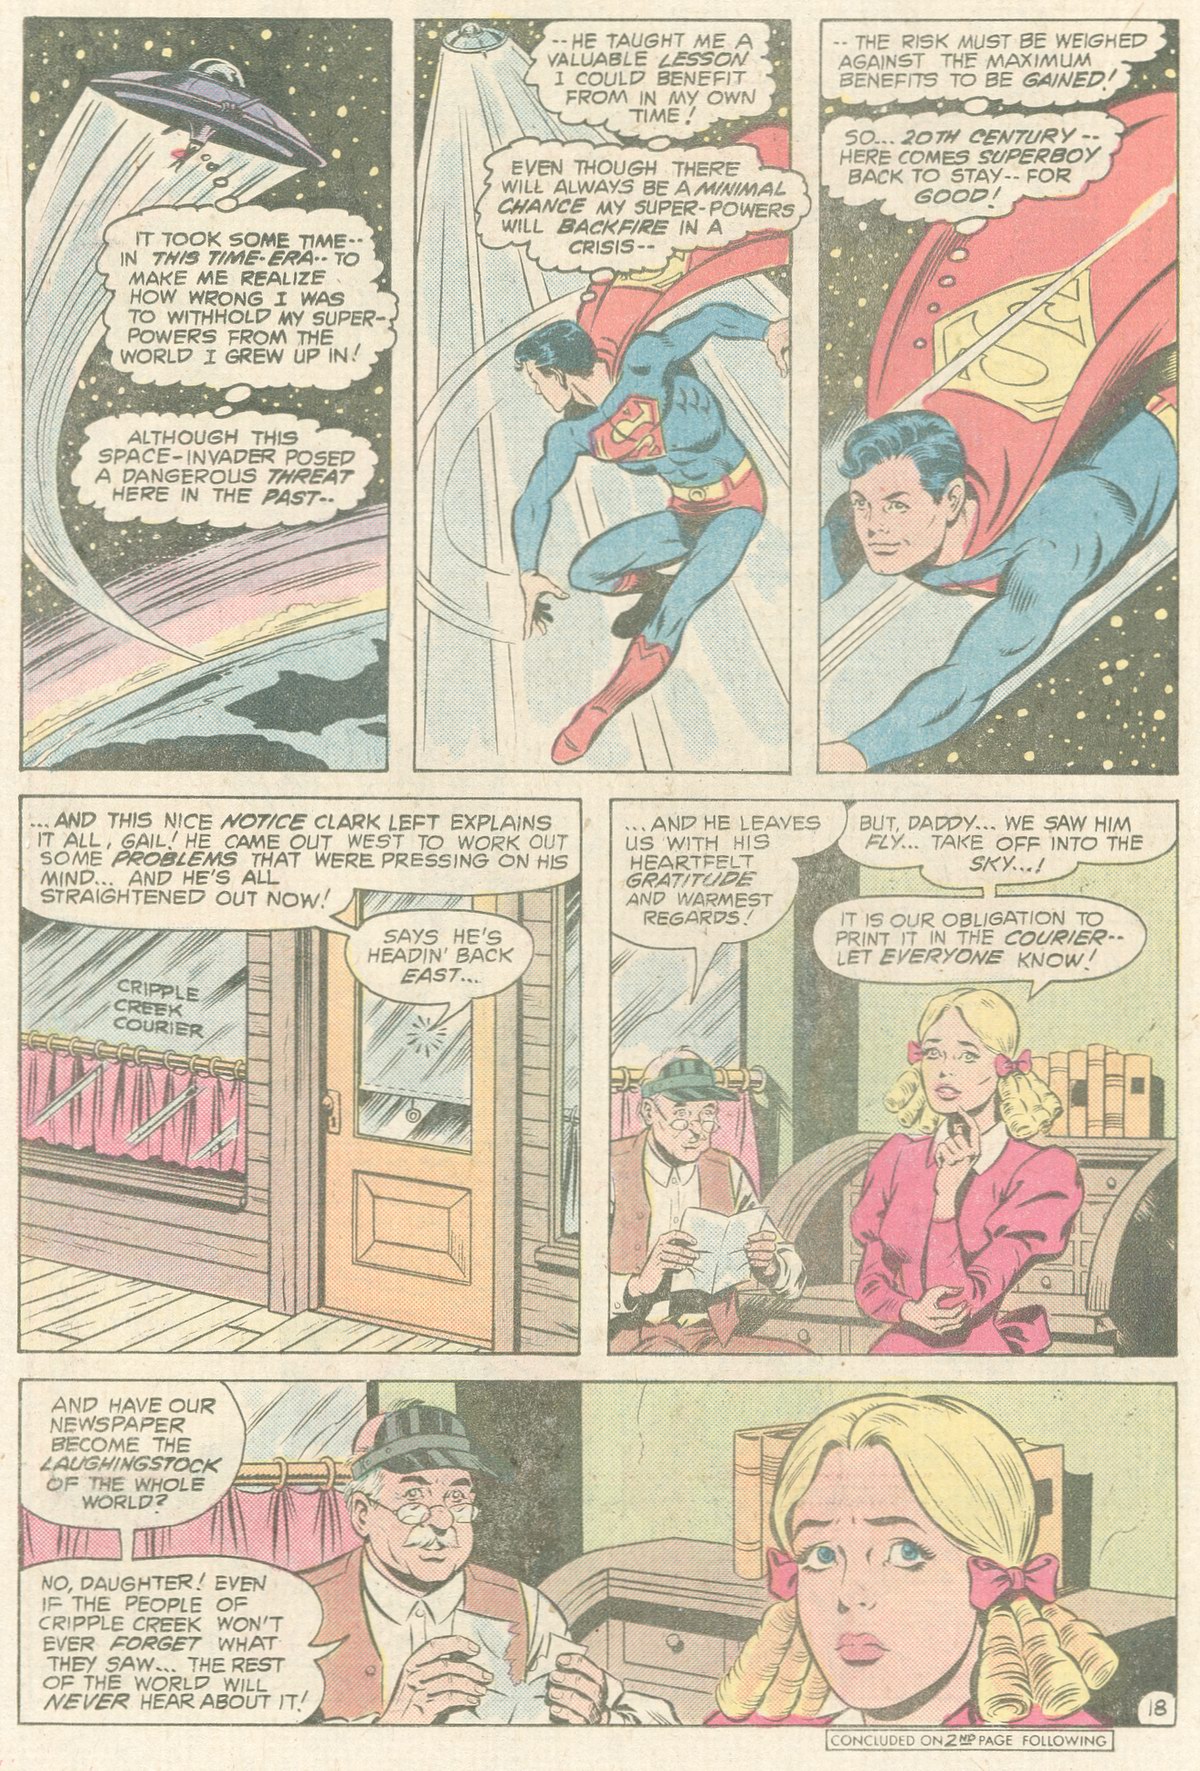 The New Adventures of Superboy 23 Page 18